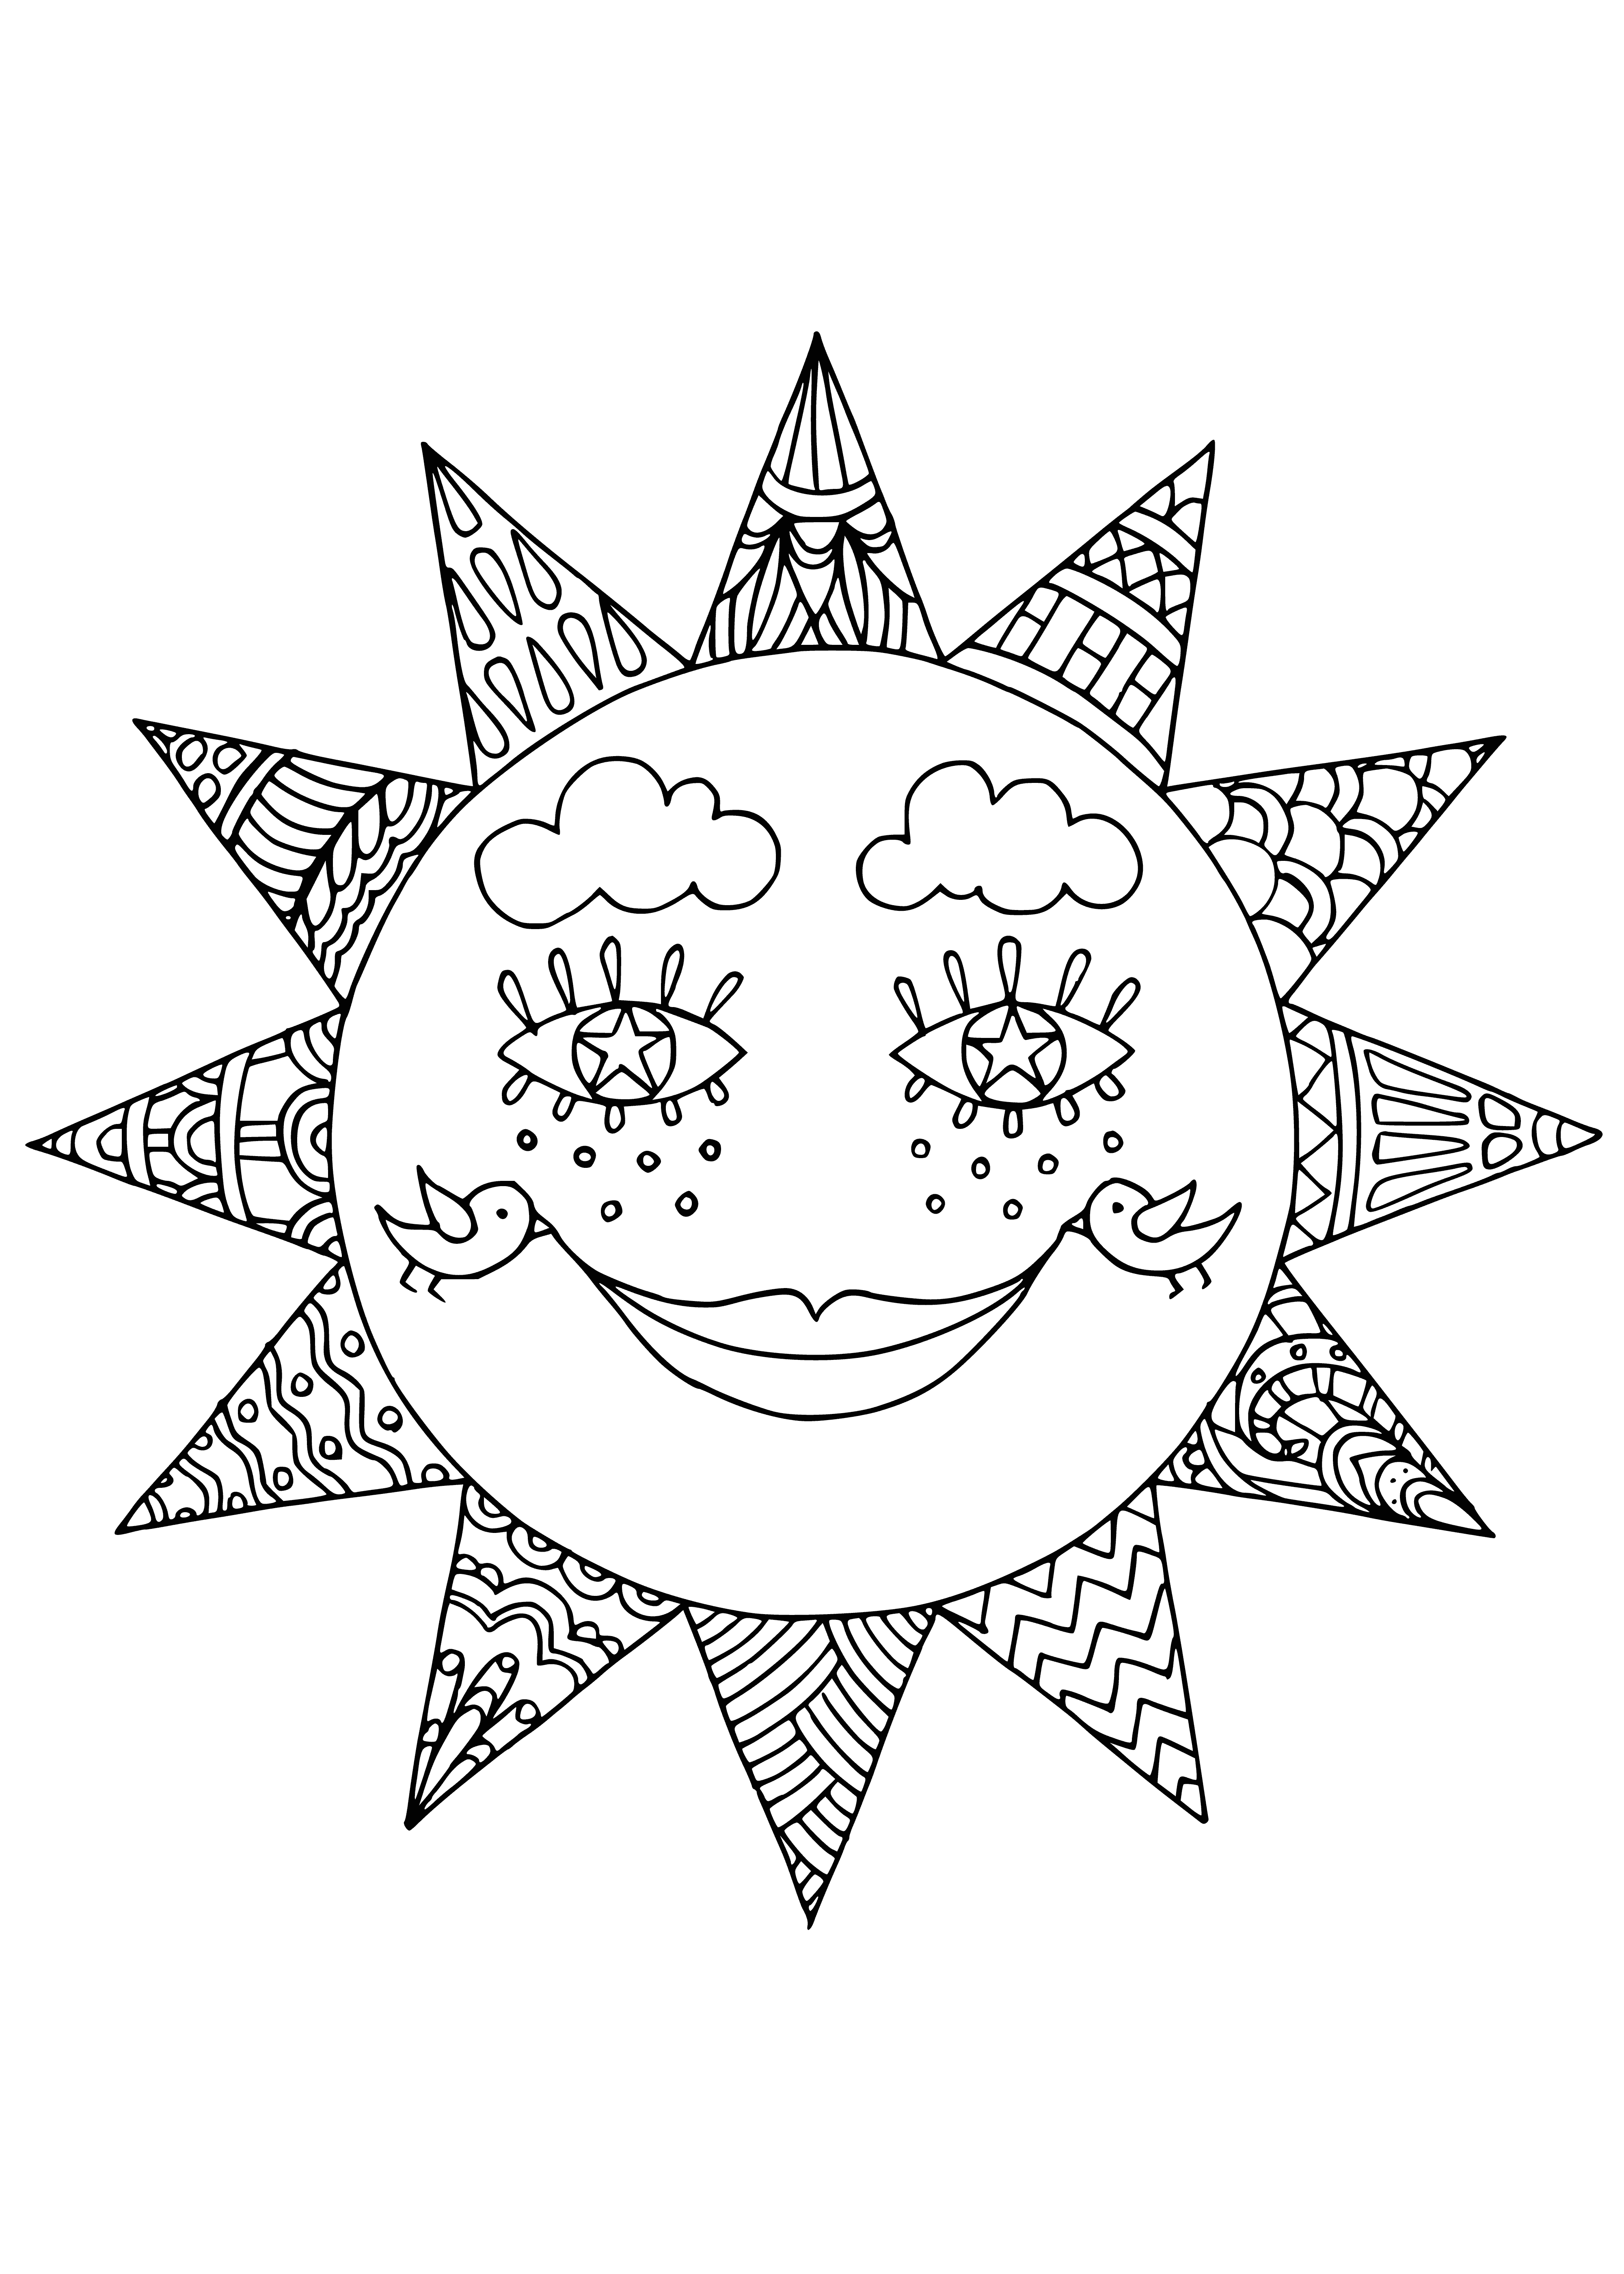 The sun is a symbol of Shrovetide coloring page